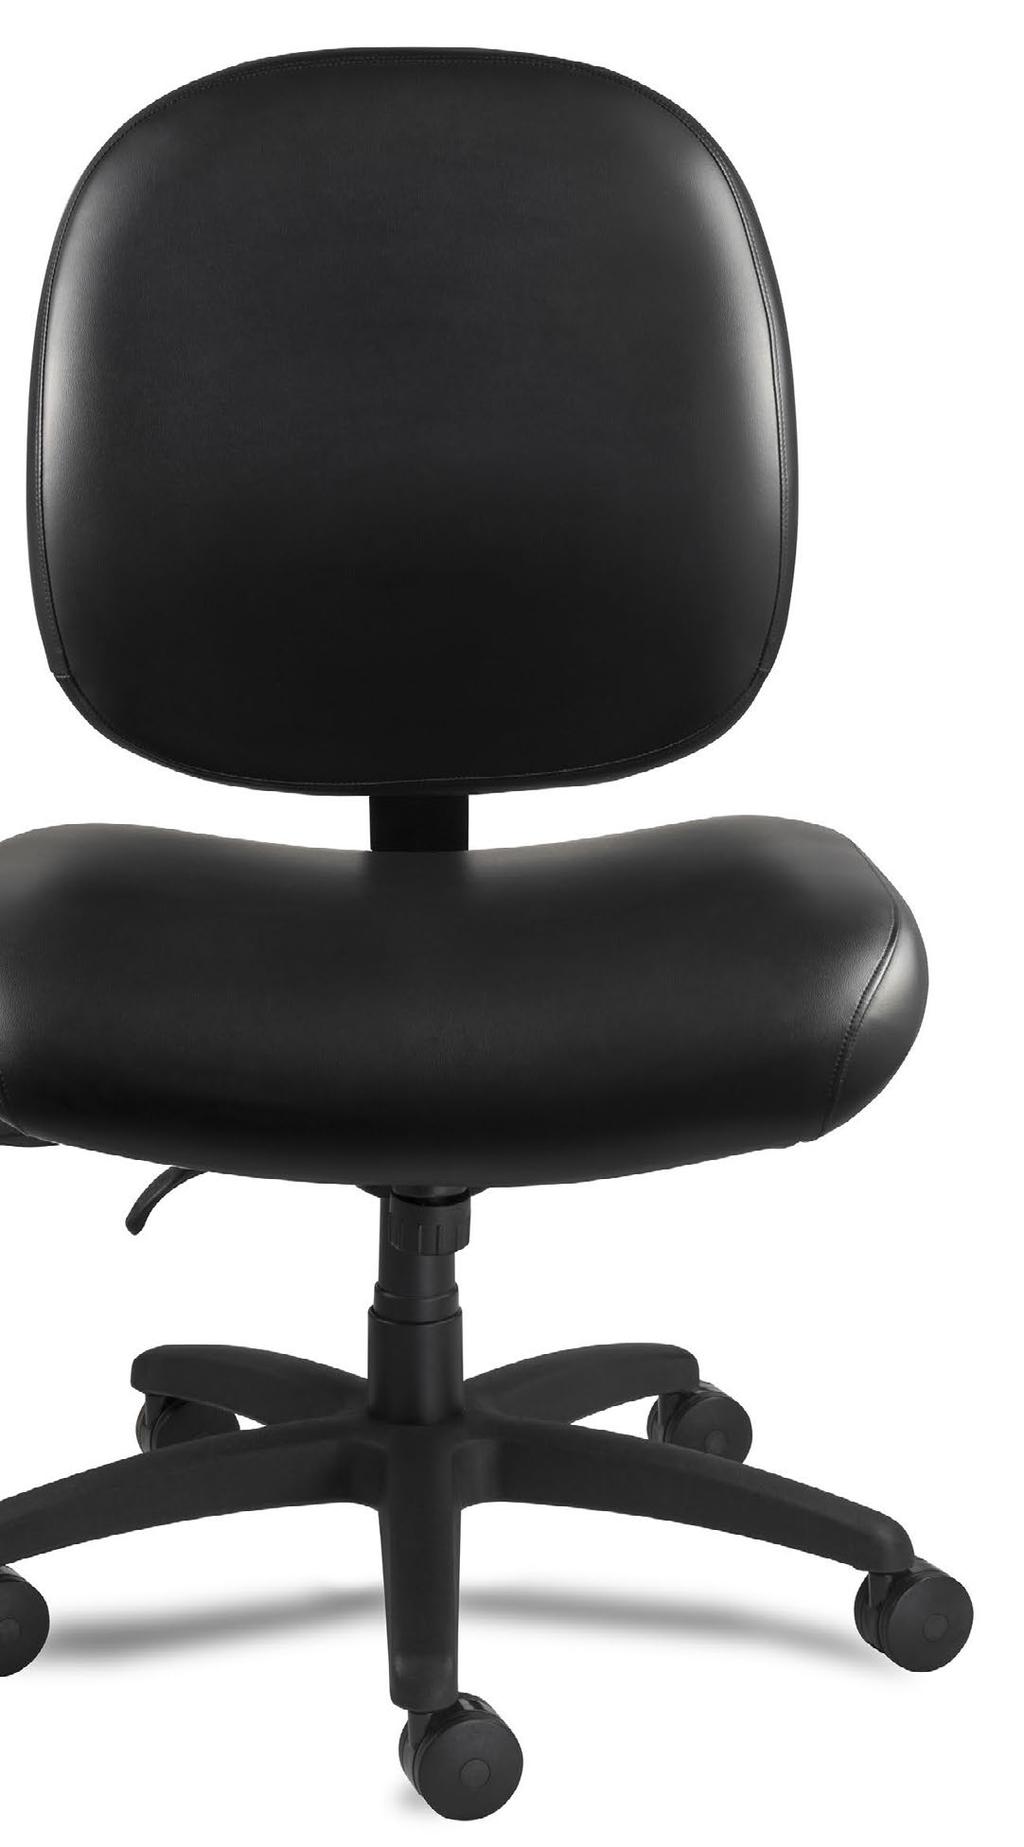 UPHOLSTERED CHAIRS 10,000 Series CARRINGTON SERIES BEVCO s CARRINGTON series provides unprecedented comfort and ergonomic adjustability at a high weight capacity.